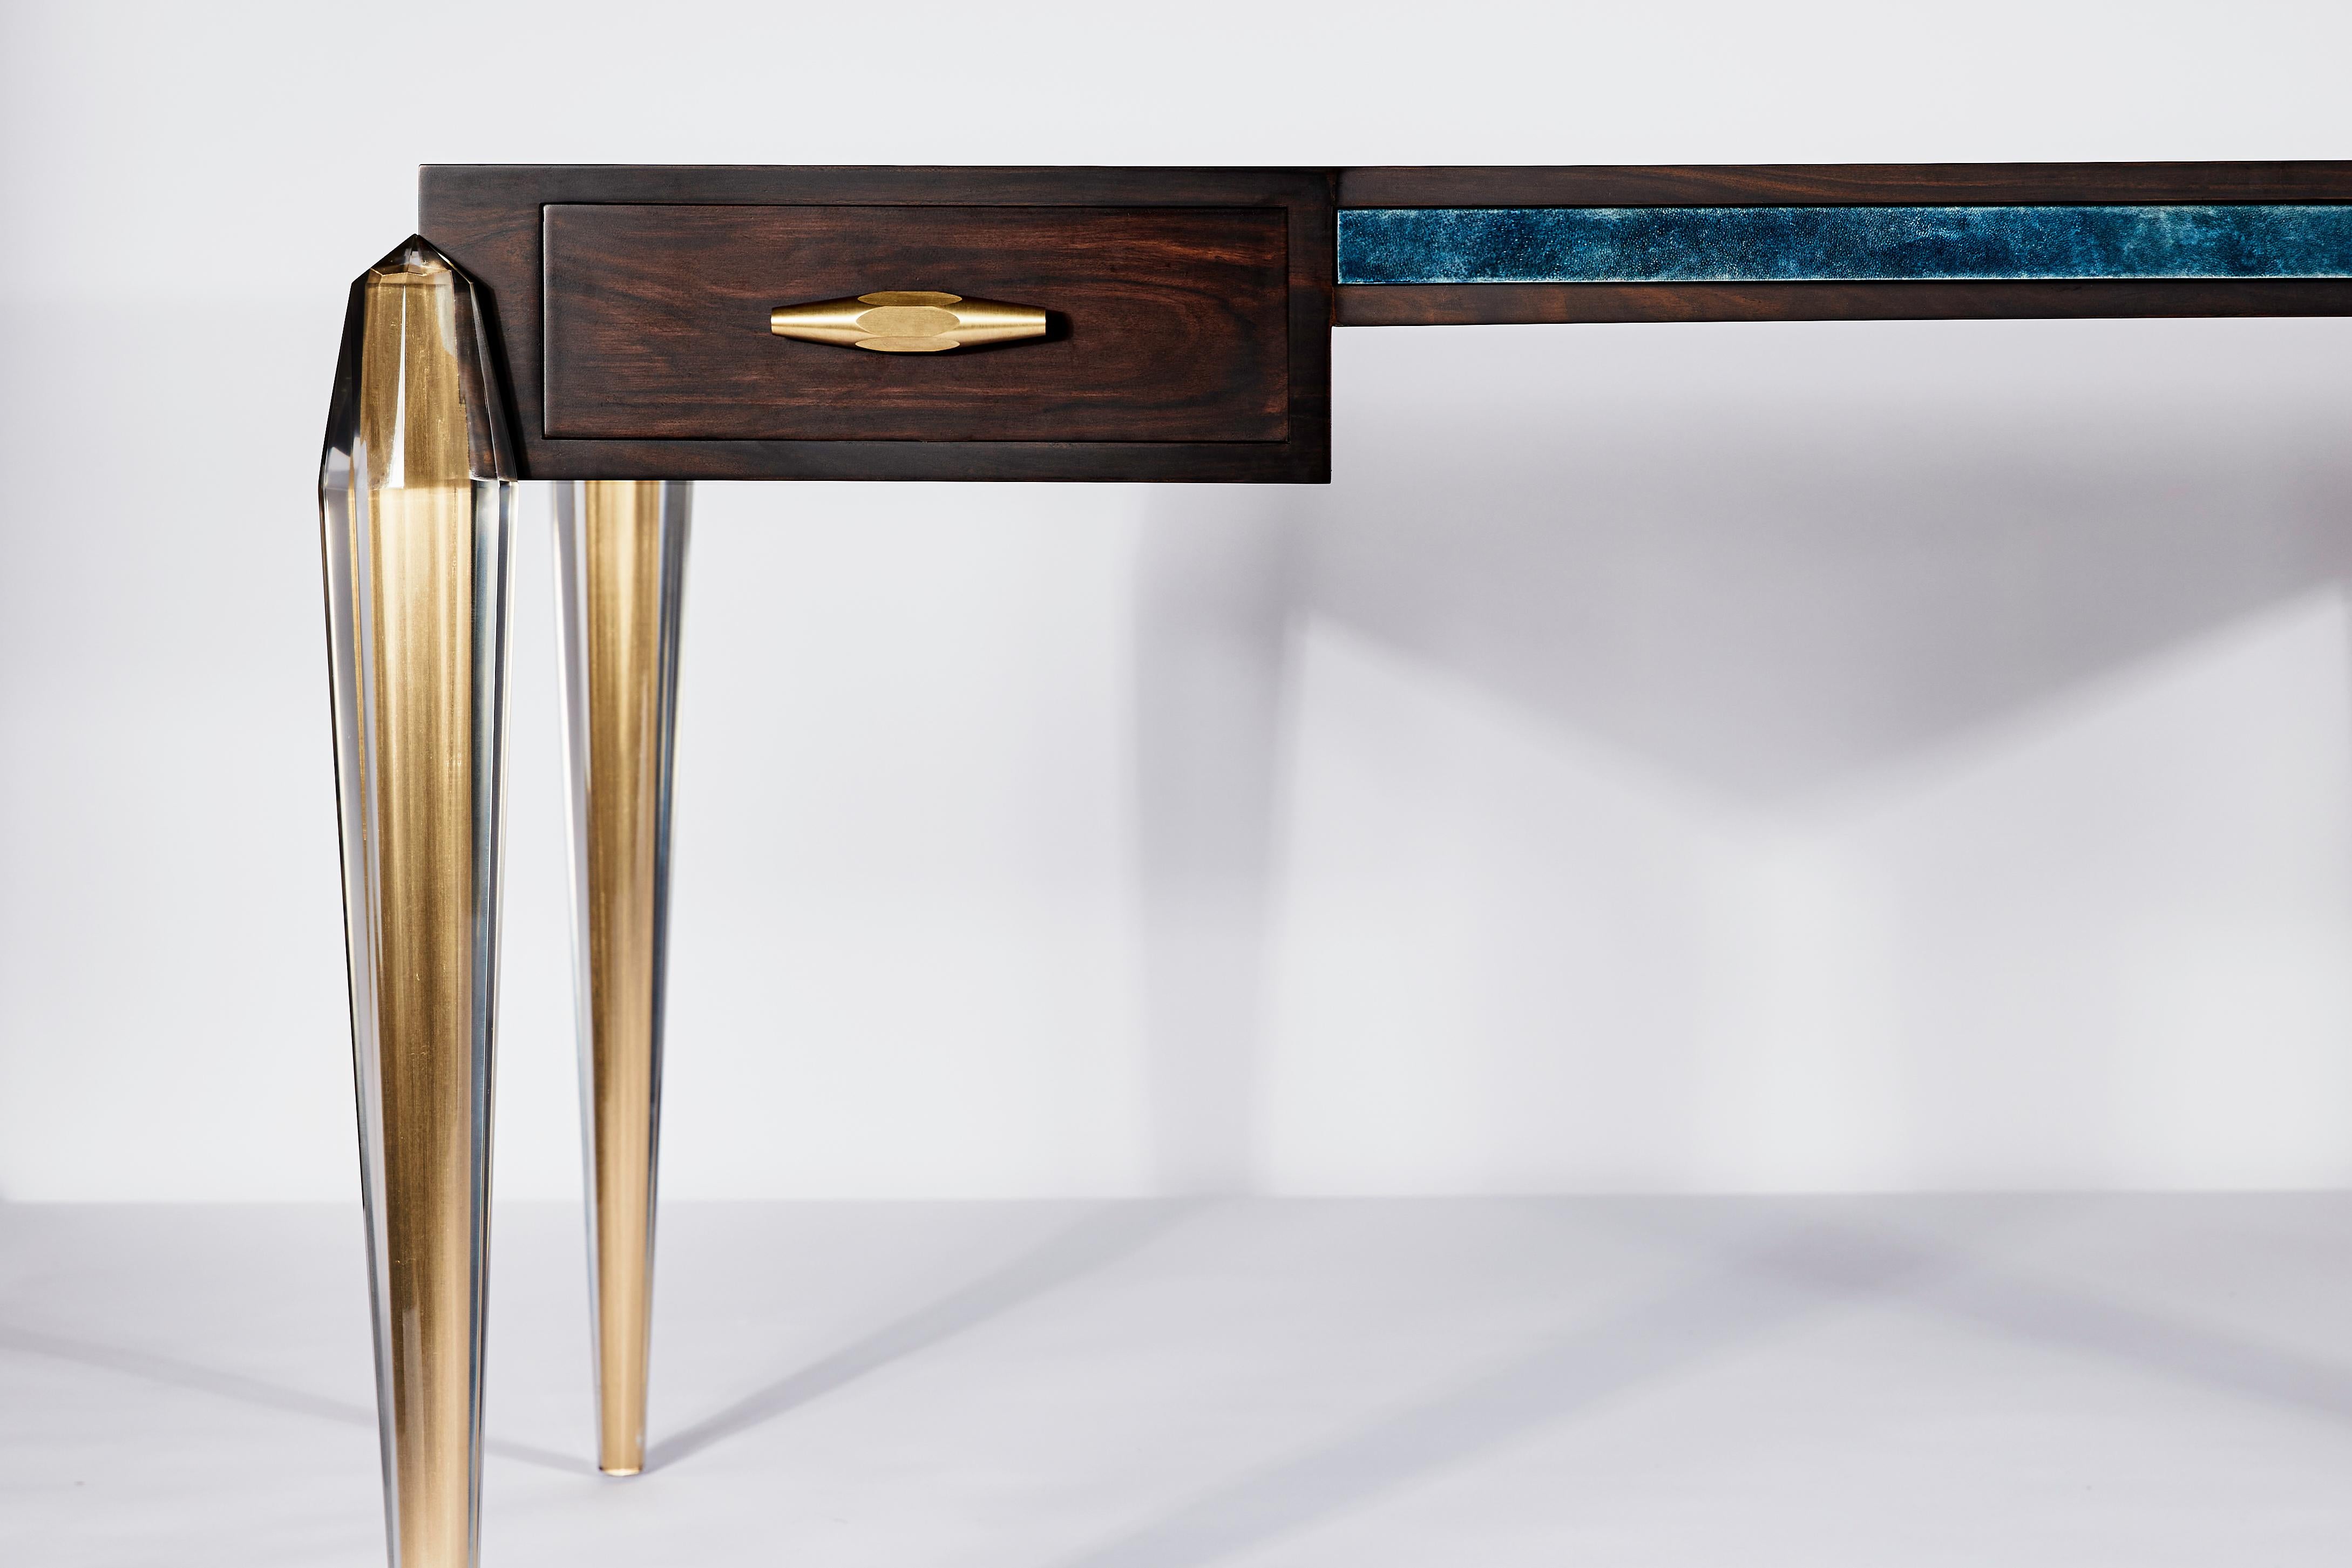 A modern and unique take on a Louis XV writing desk that Jacques-Emile Ruhlmann reworked in 1920’s Paris. Fossilised is an homage to work of both periods and ormolu in particular. Here, the brass is cast in resin like a piece of amber, forever